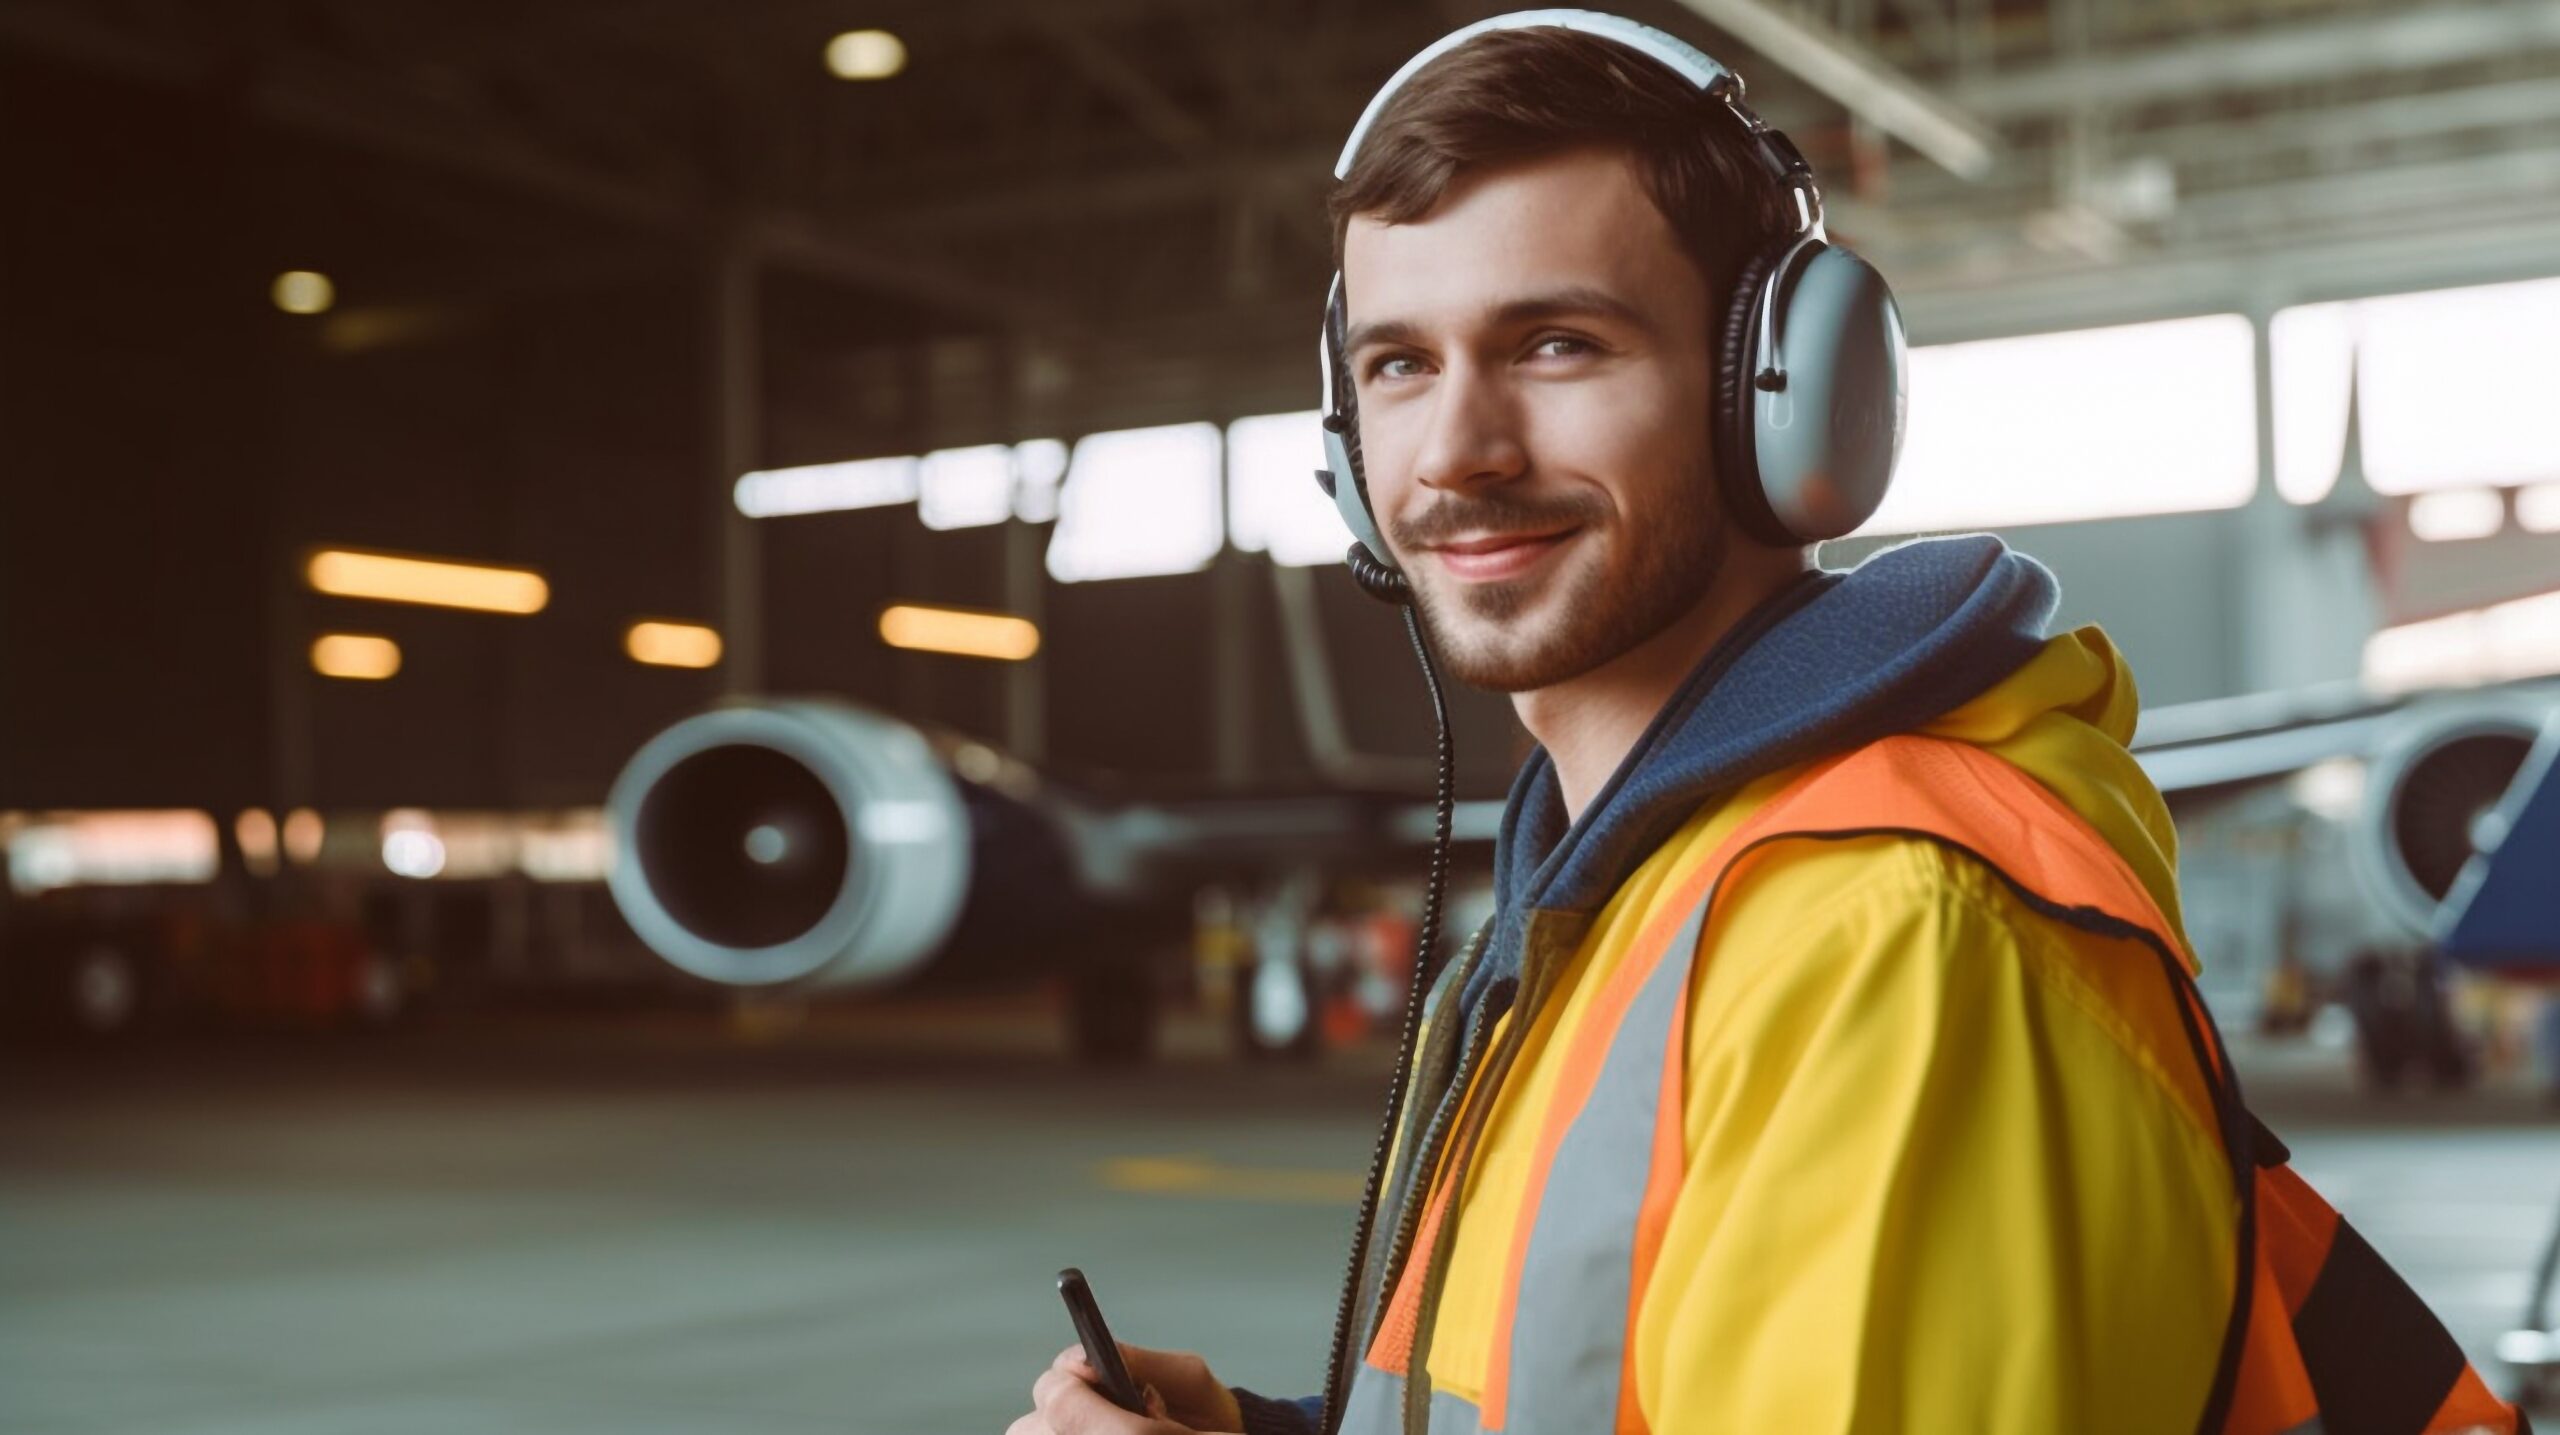 Yellow-vest worker with headphones in an airport